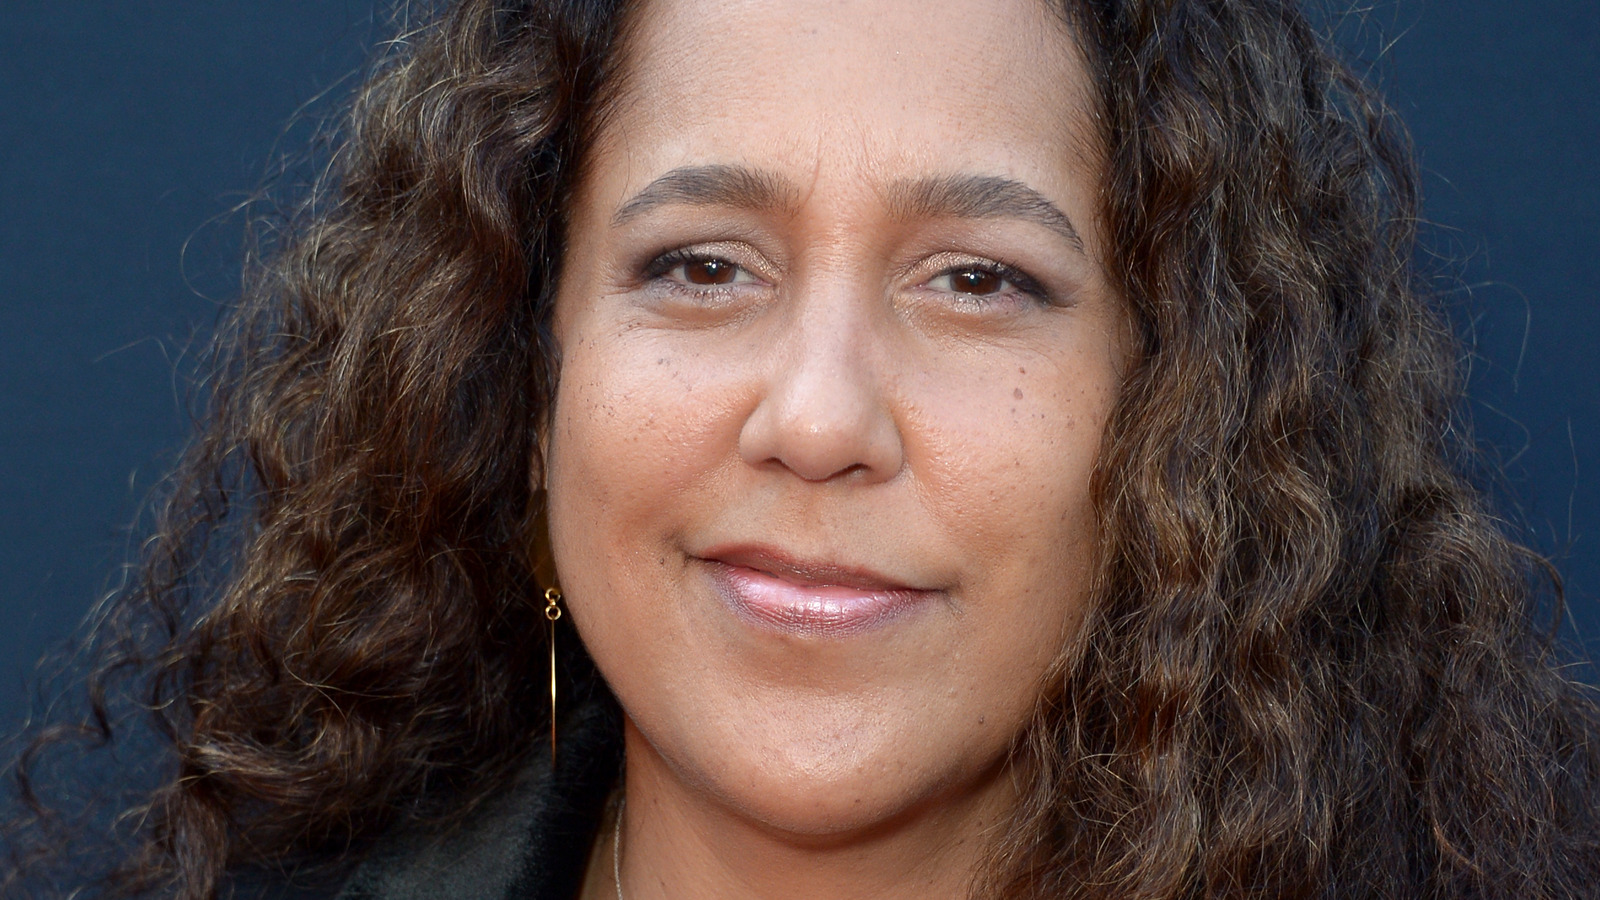 Gina Prince-Bythewood on 'The Woman King' and 'A Different World' Reboot